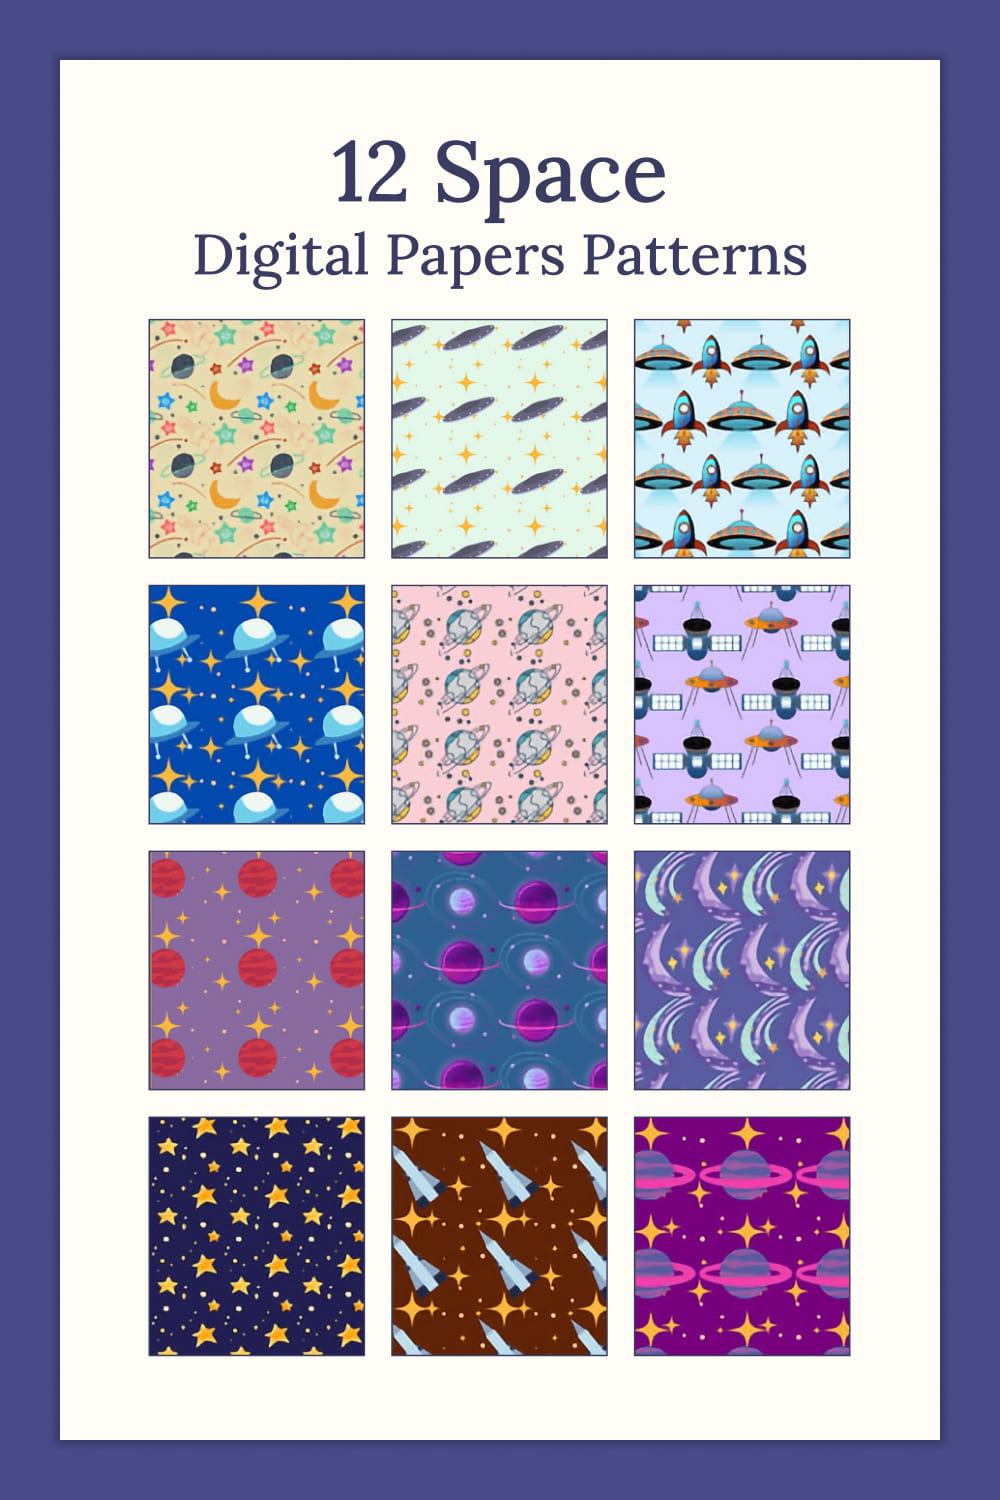 A collection of adorable space-themed paper patterns.